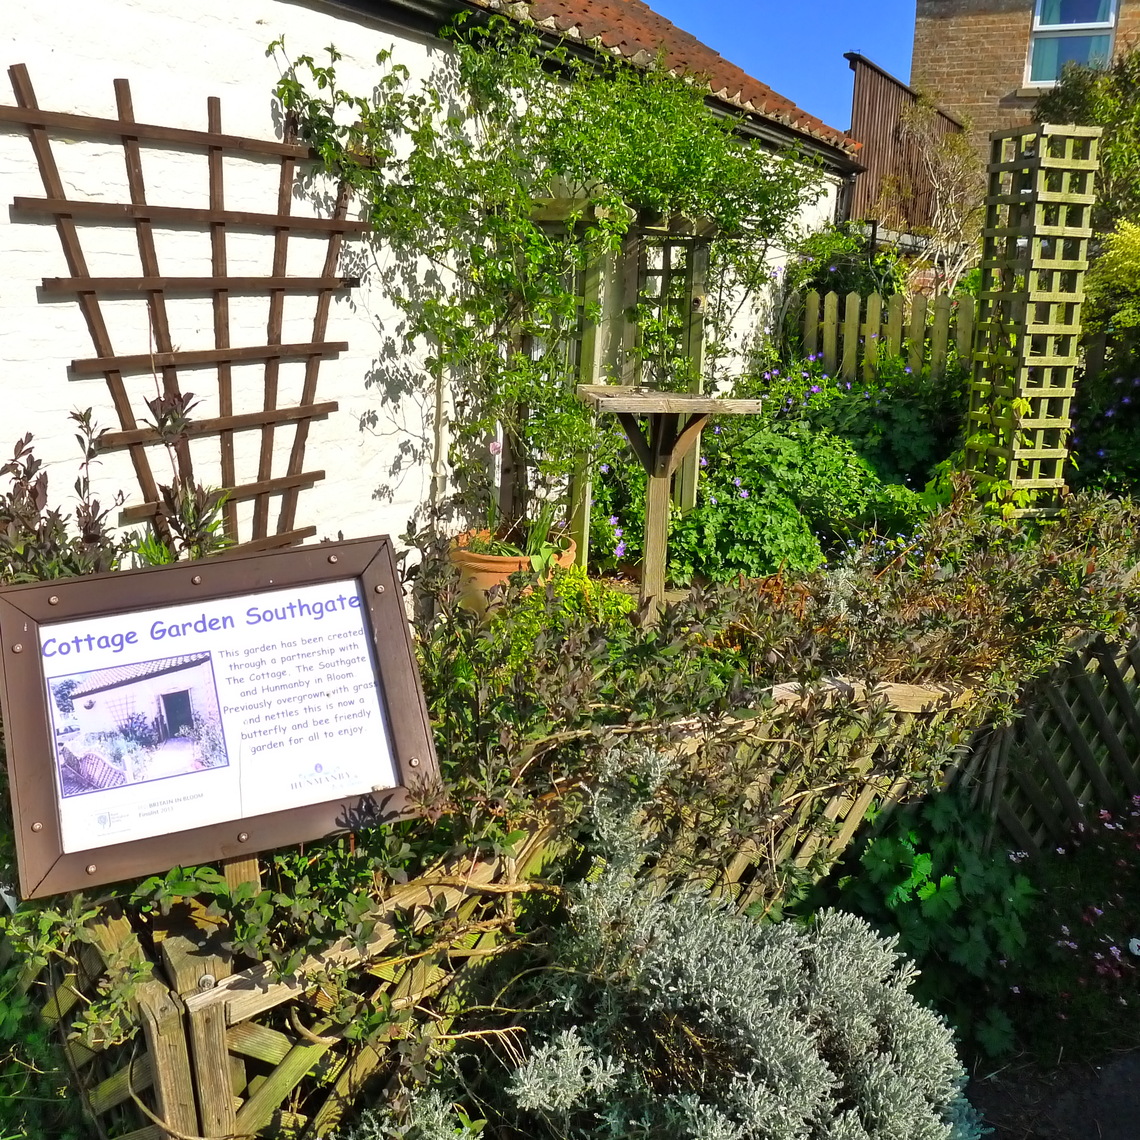 Cottage Garden at the rear of The Southgate in Hunmanby